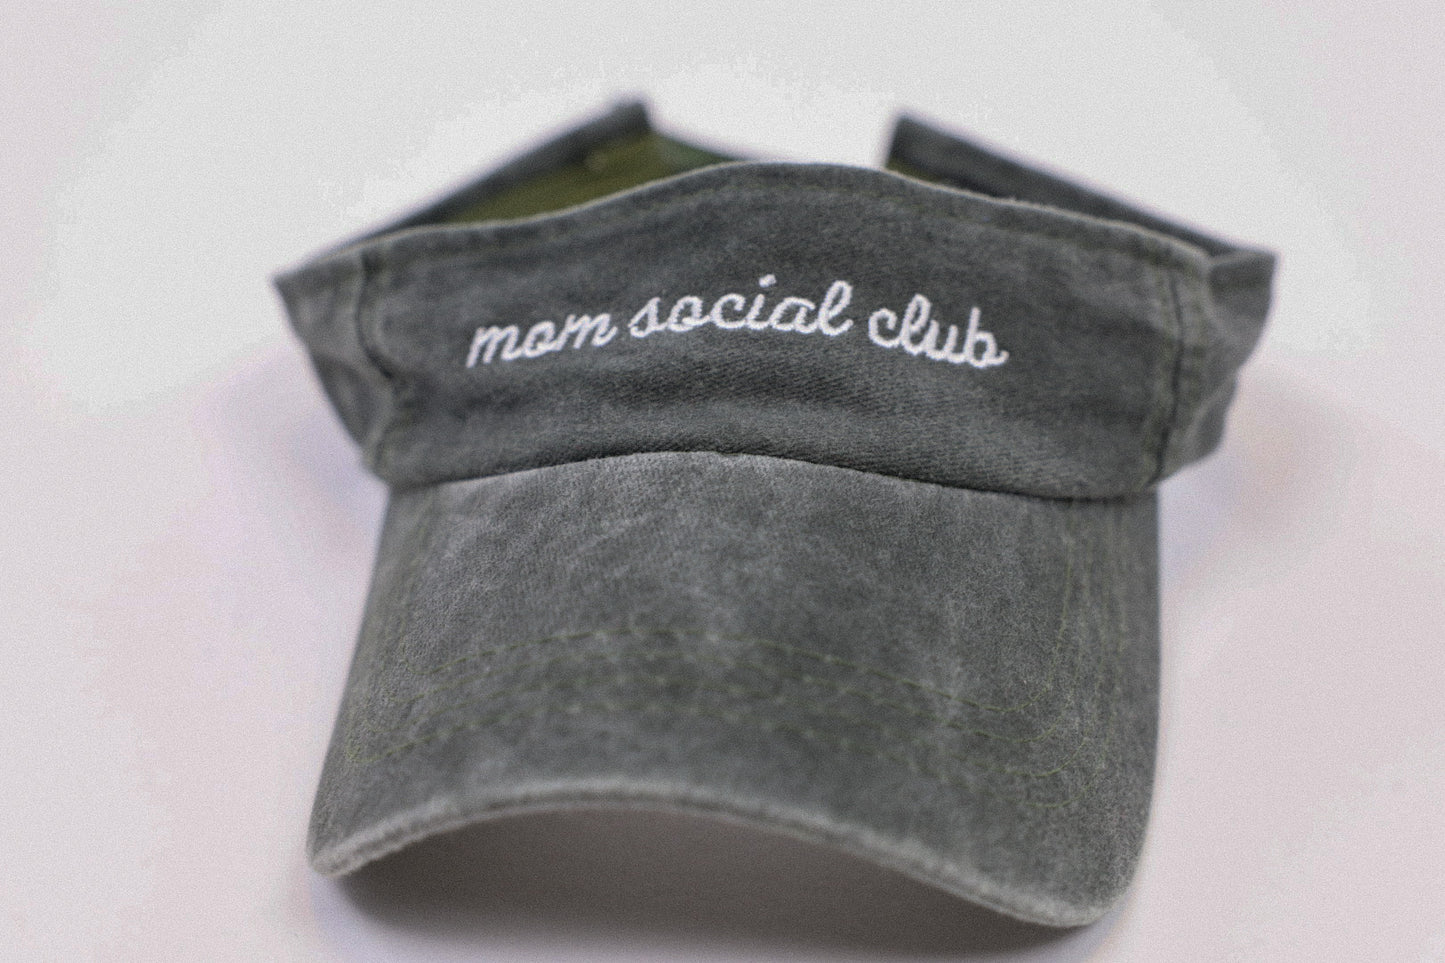 Washed and vintage style visor which is green with words mom social club on it.